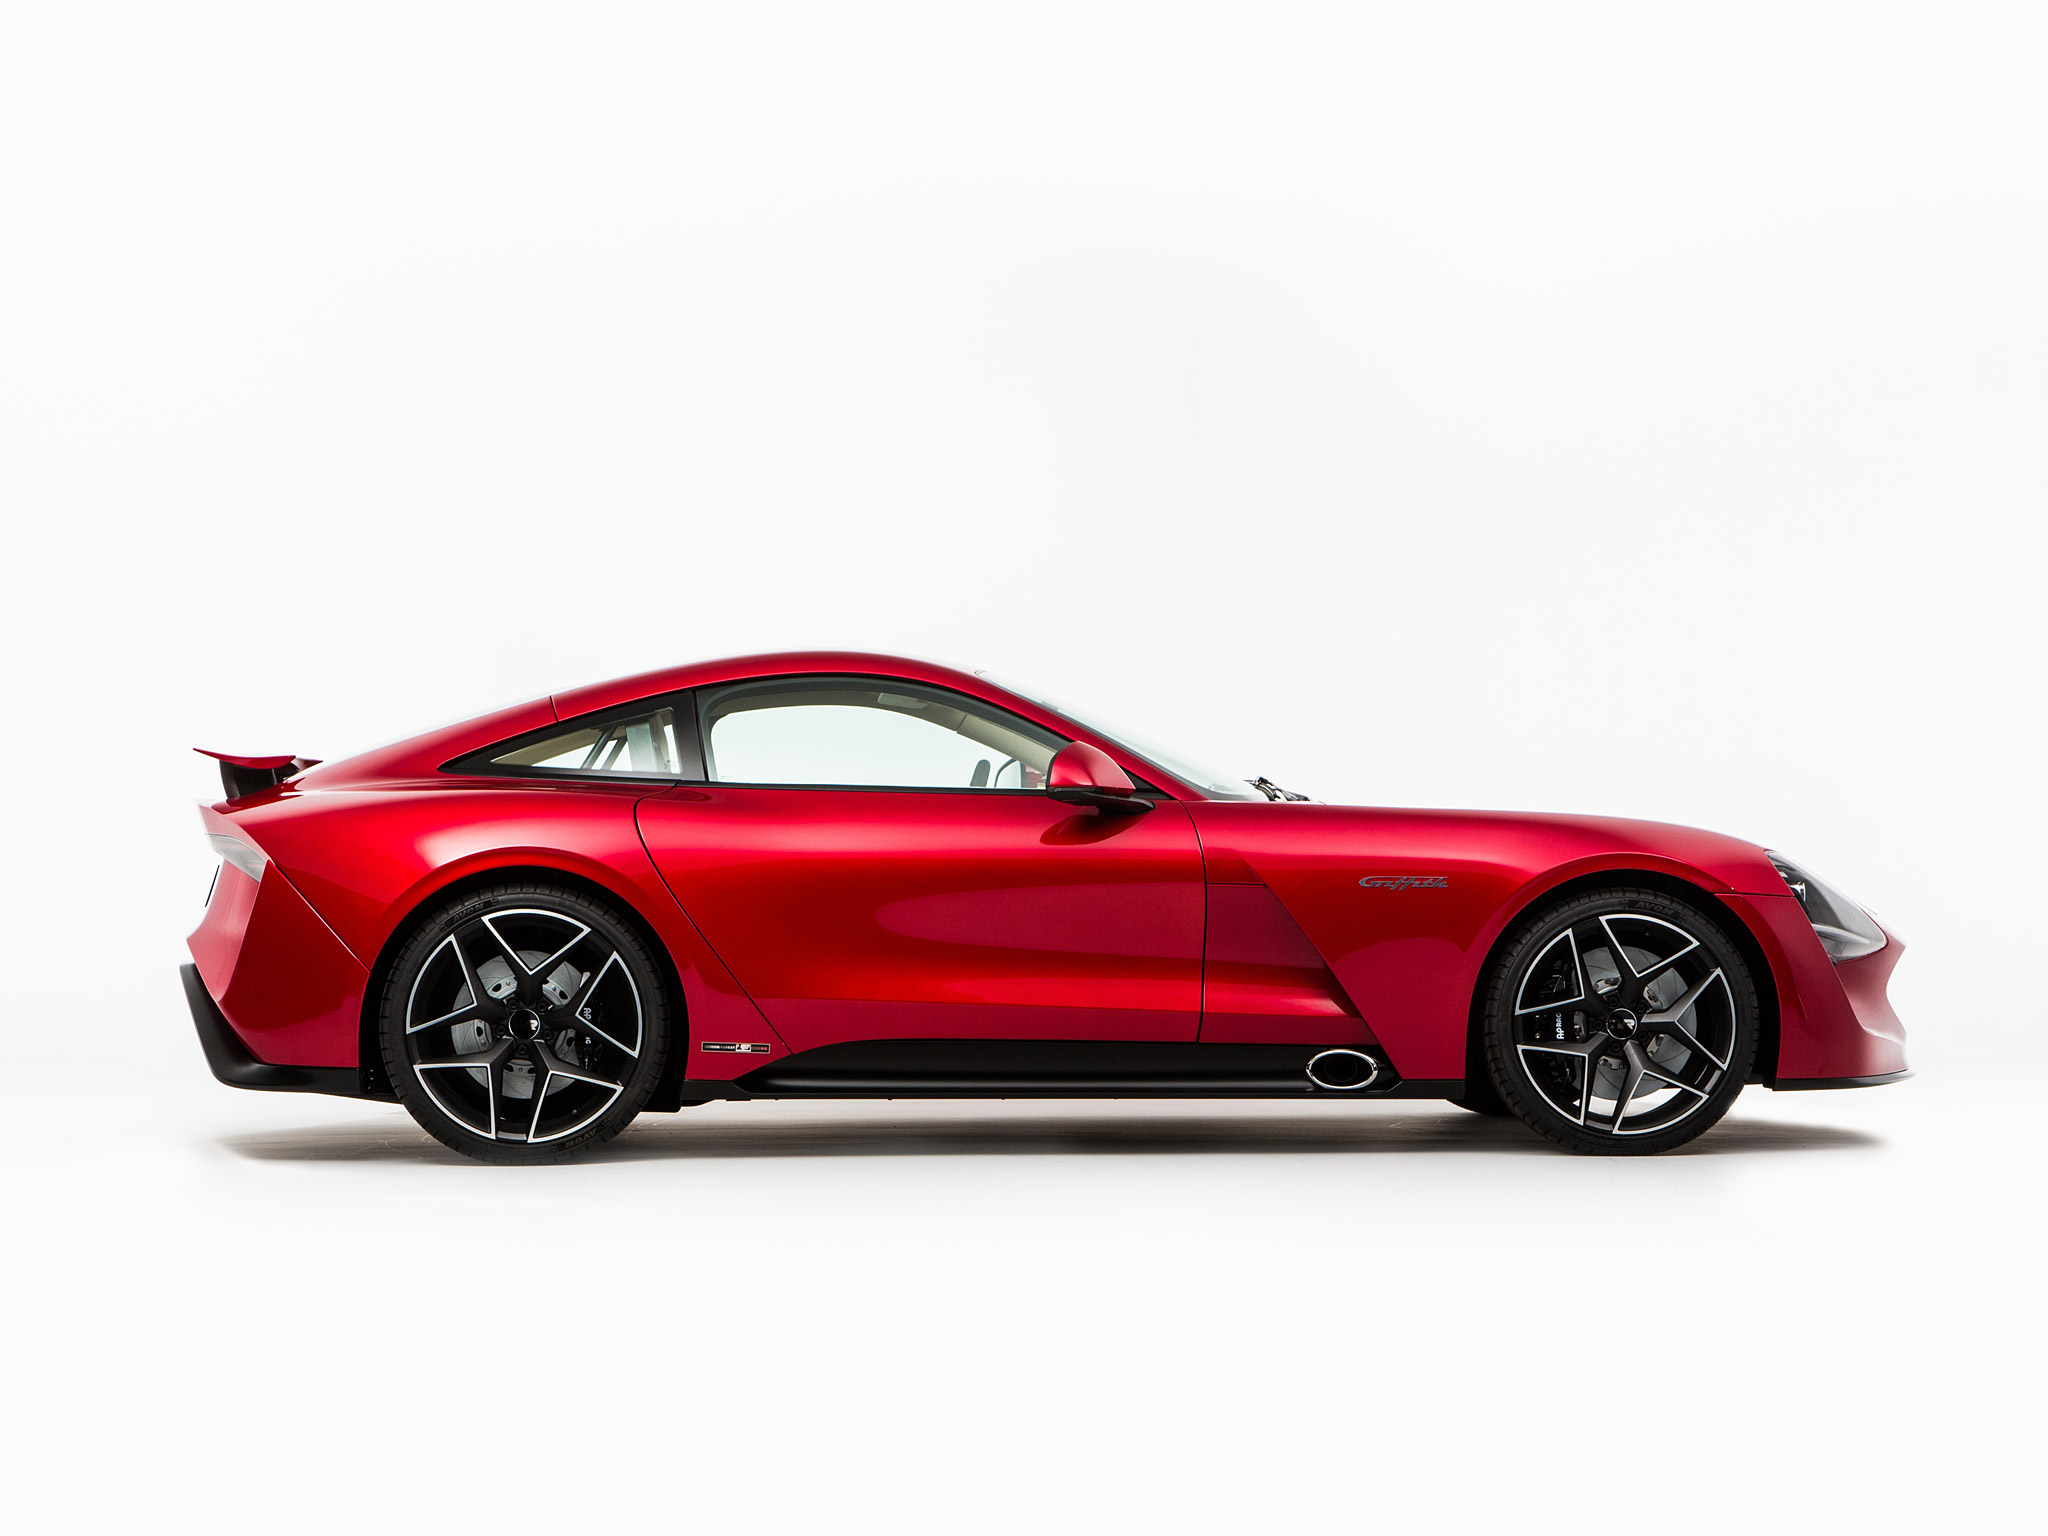  2018 TVR Griffith Wallpaper.